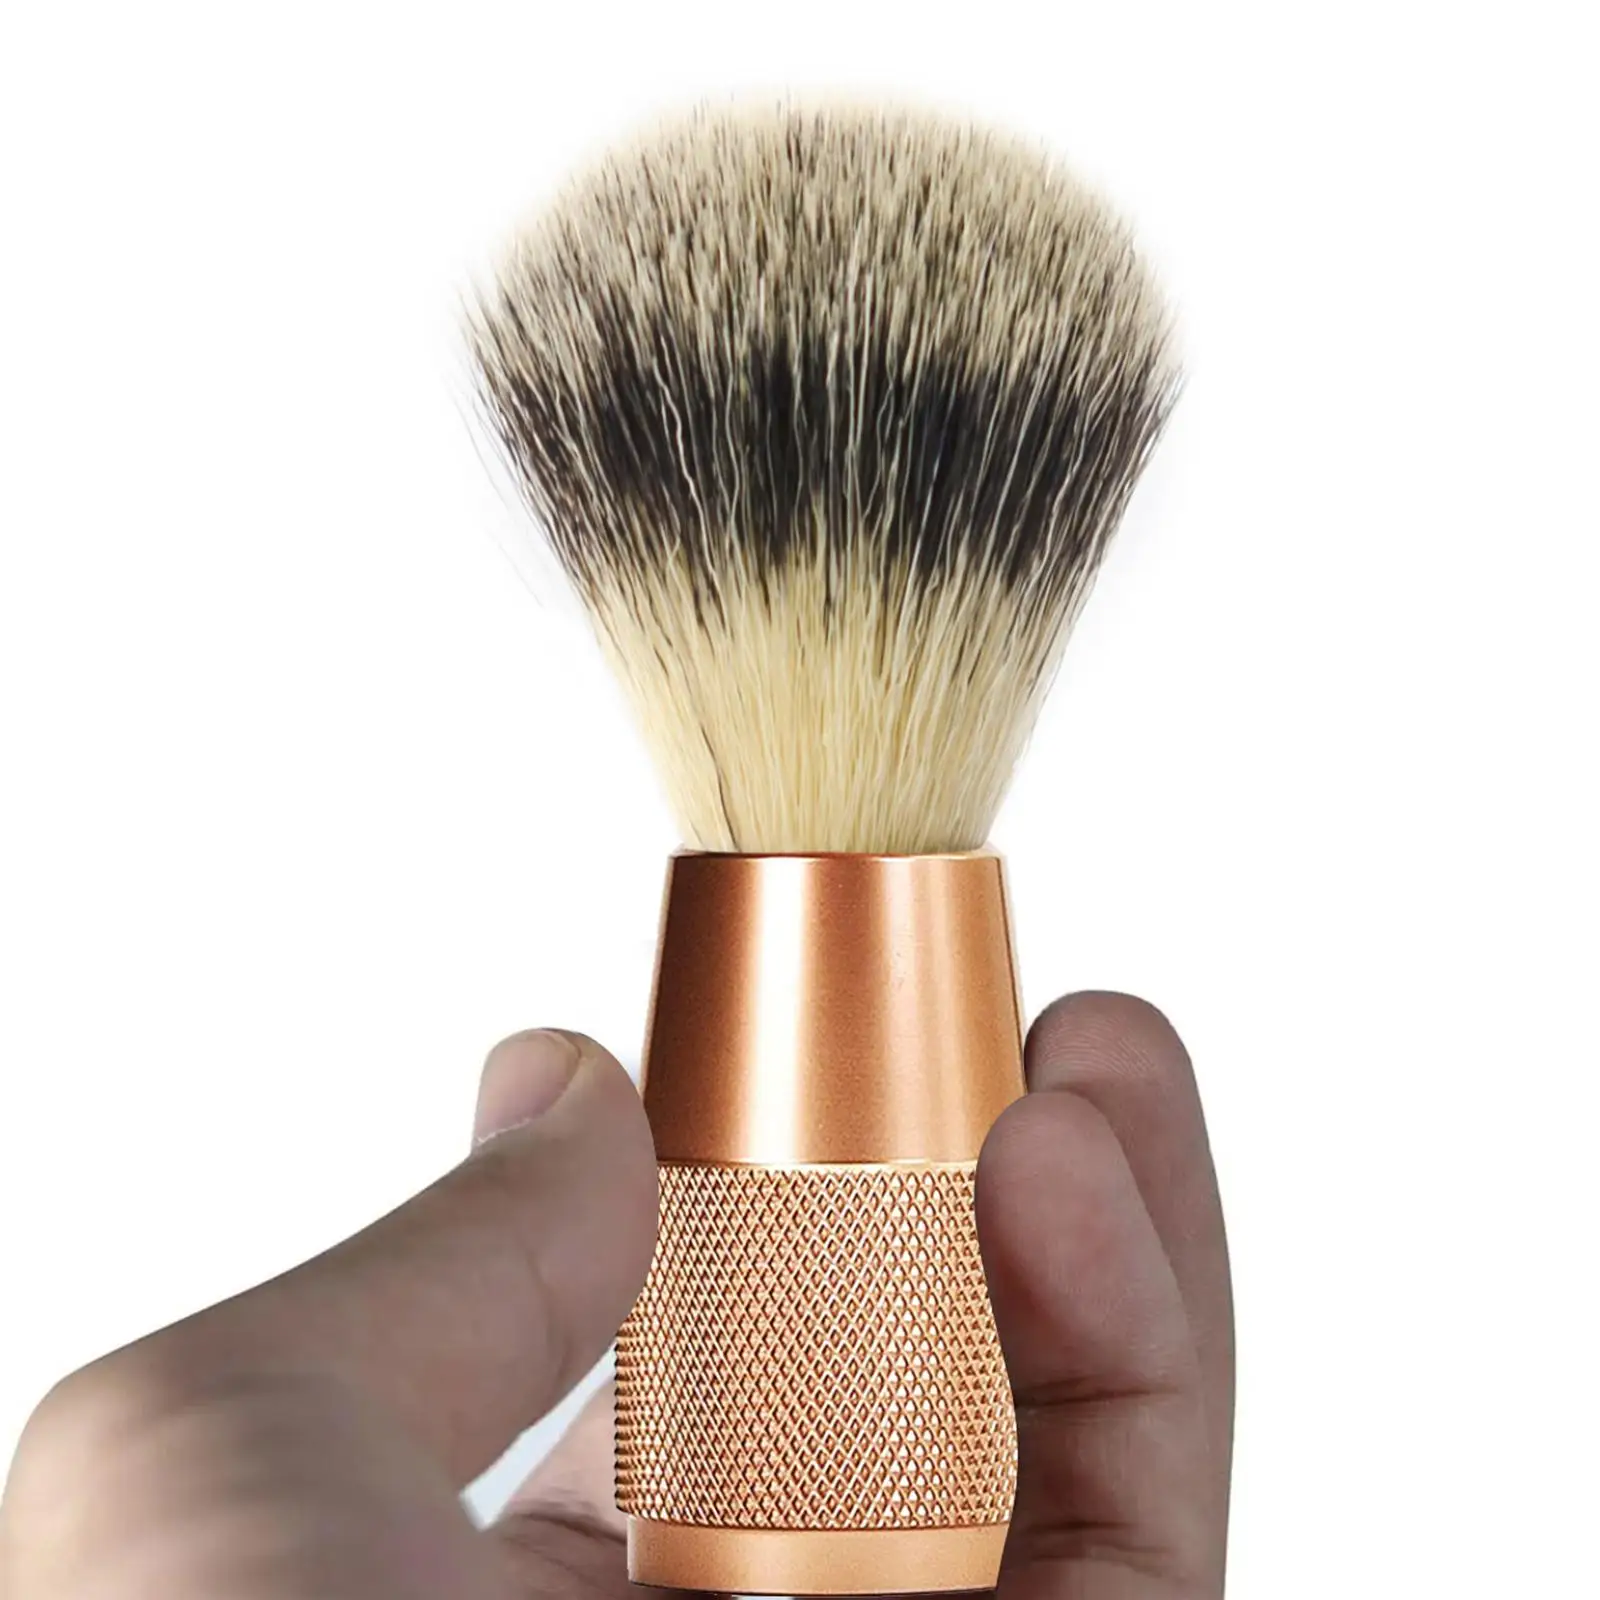 Shaving Brush for Men Gentle Bristles Durable for Your Father Husband Handled Length 4.3inch Metal Handle Face Hair Cleaning